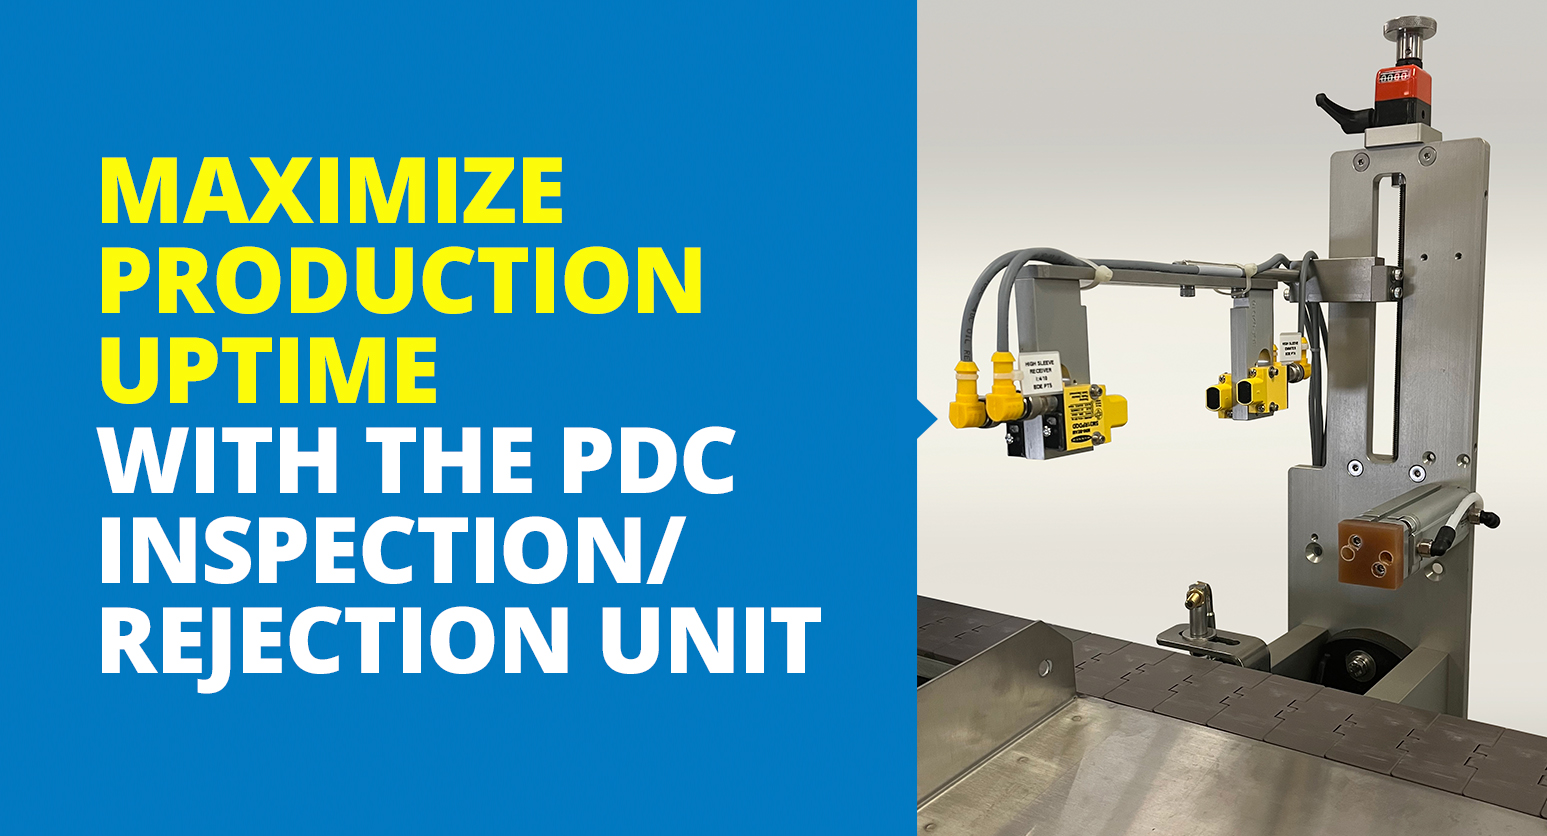 Maximize Production Uptime with the PDC Inspection__Rejection Unit